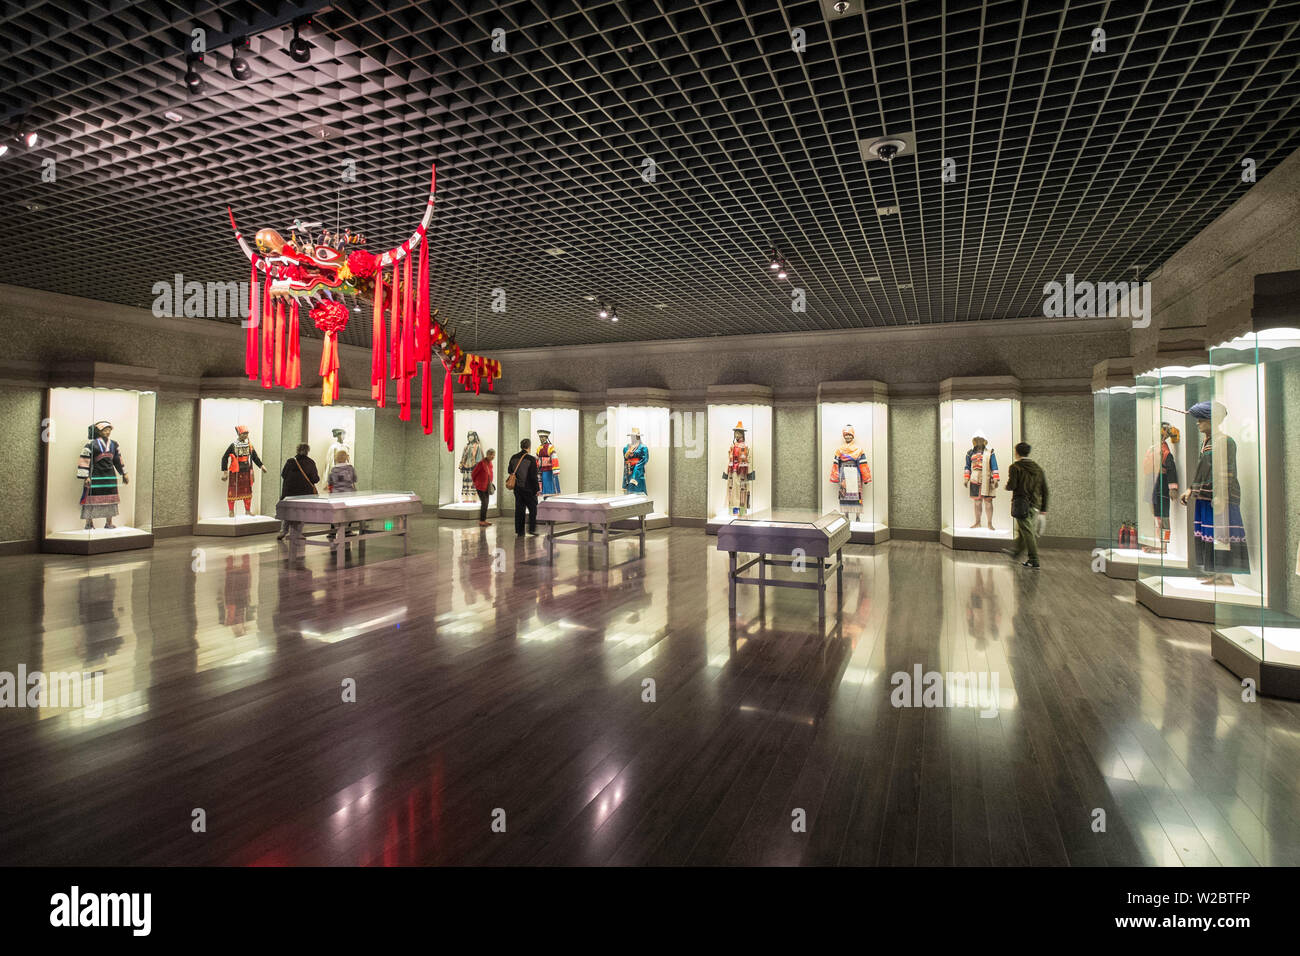 Display of regional traditional dress, Shanghai Museum, People's Square, Shanghai, China Stock Photo